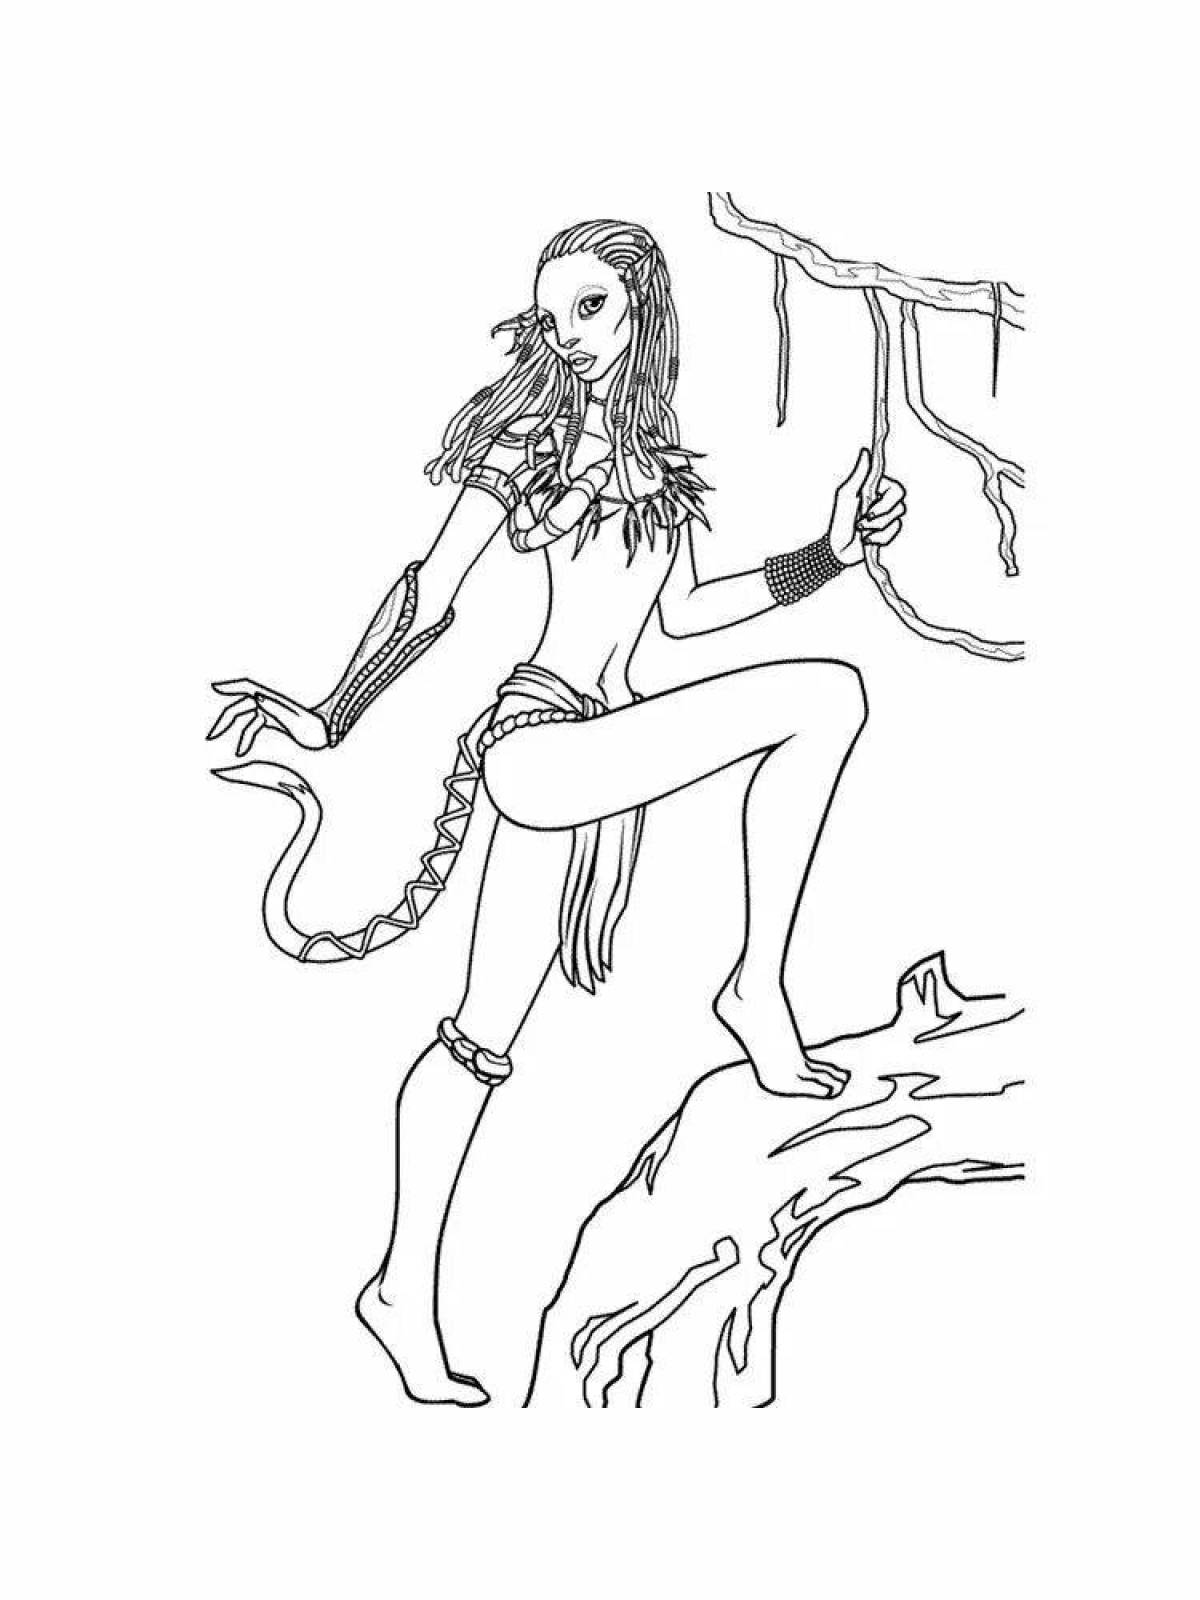 Peaceful waterway avatar coloring page